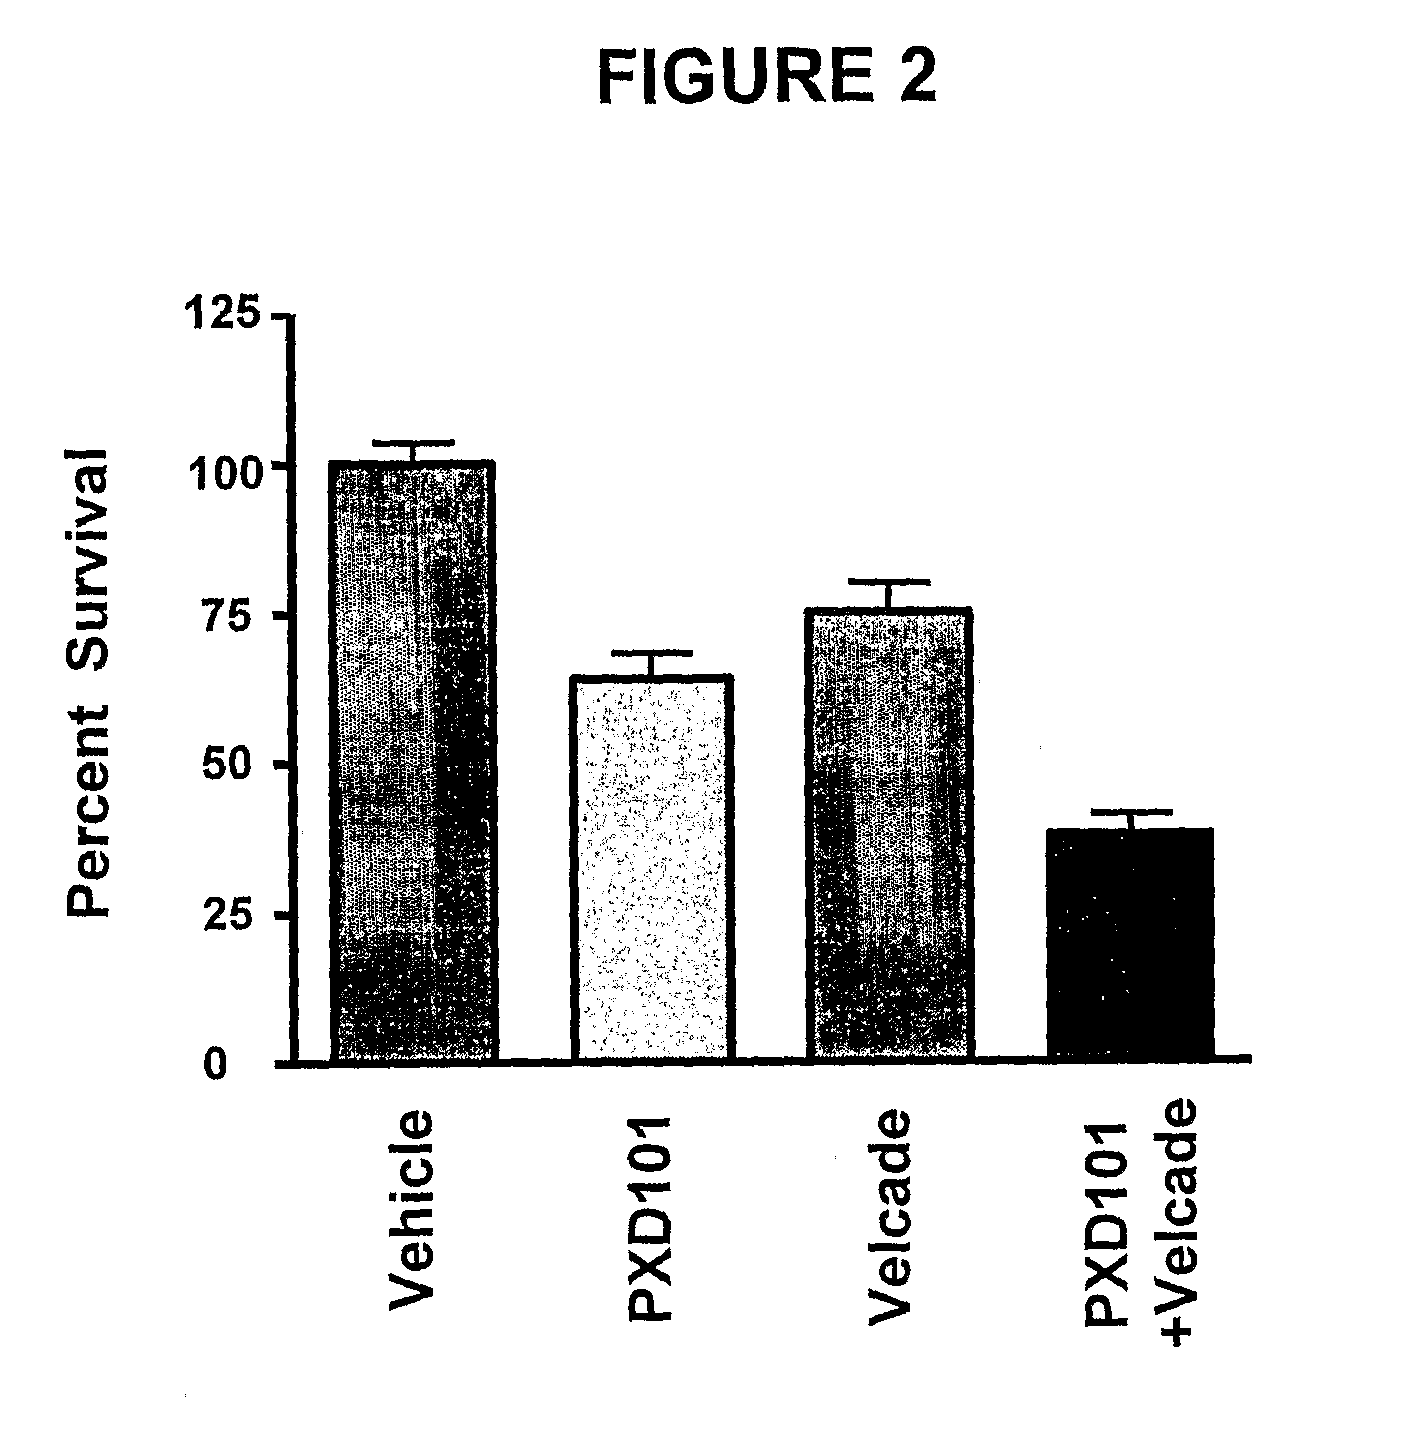 Histone Deacetylase (Hdac) Inhibitors (Pxd101) for the Treatment of Cancer Alone or in Combination With Chemotherapeutic Agent